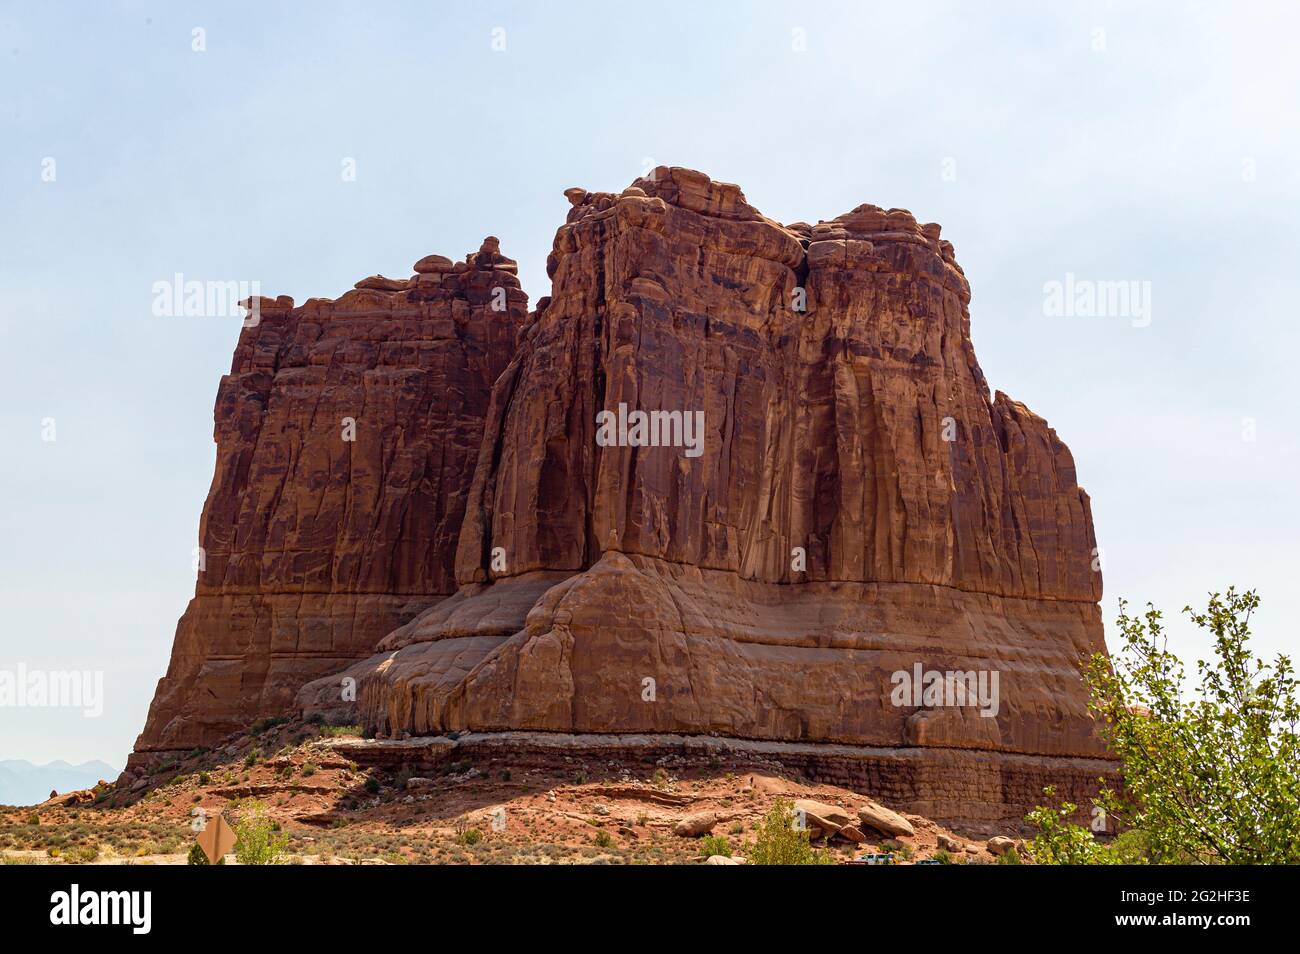 The Organ is an impressive sandstone fin located next to Park Avenue Trail and Courthouse Towers at Arches National Park, Utah, USA Stock Photo